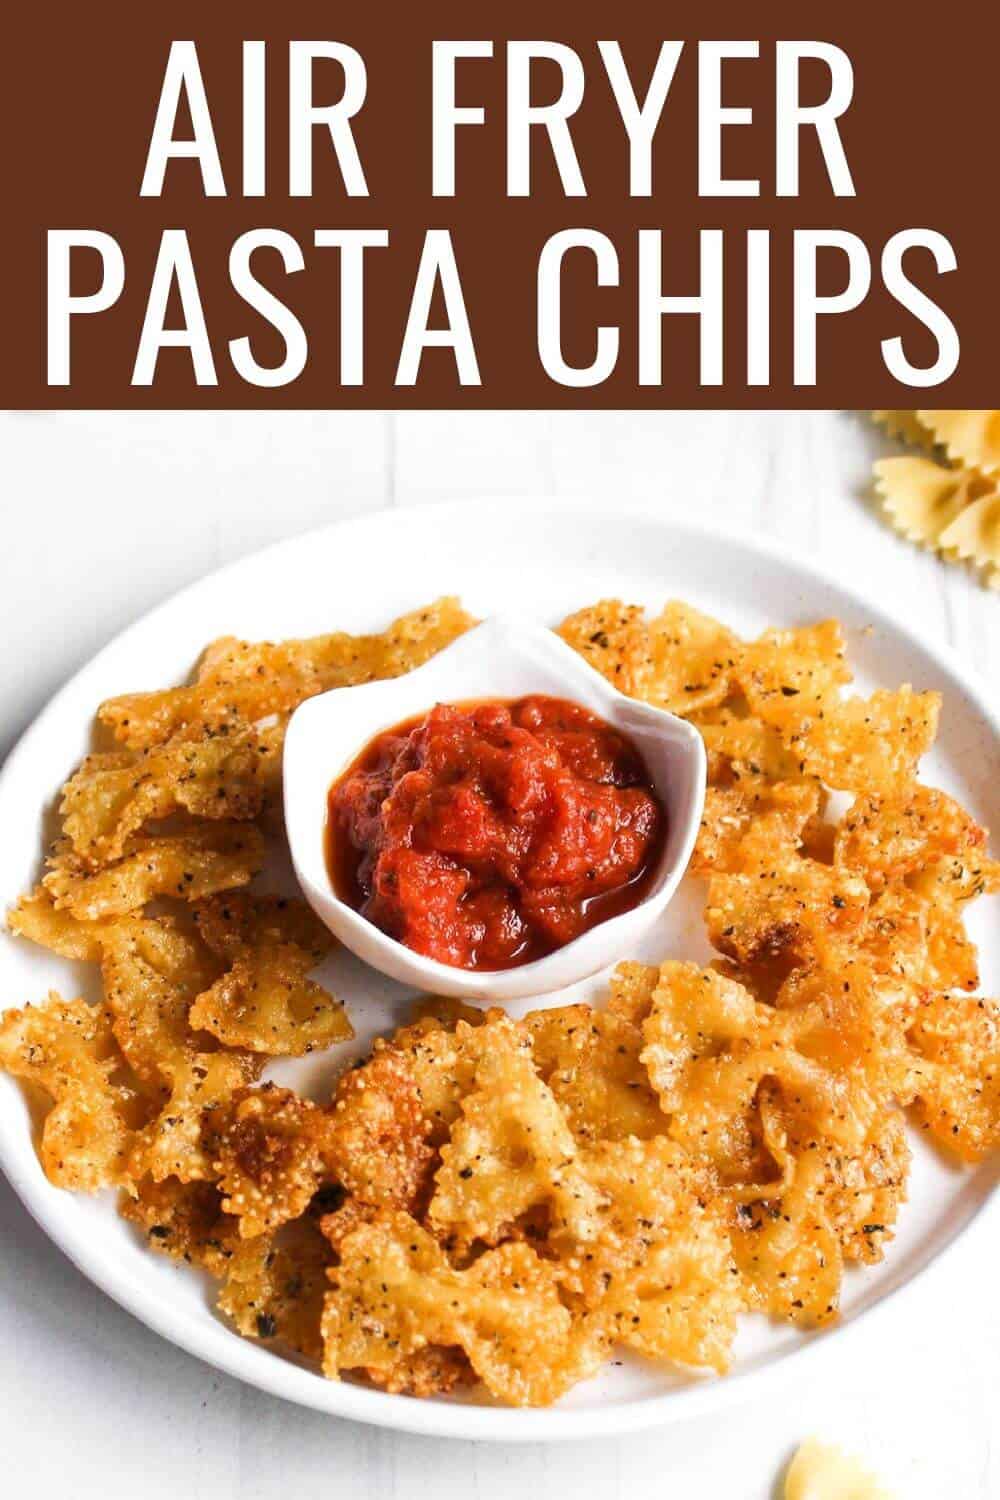 Air fryer pasta chips with title text overlay.